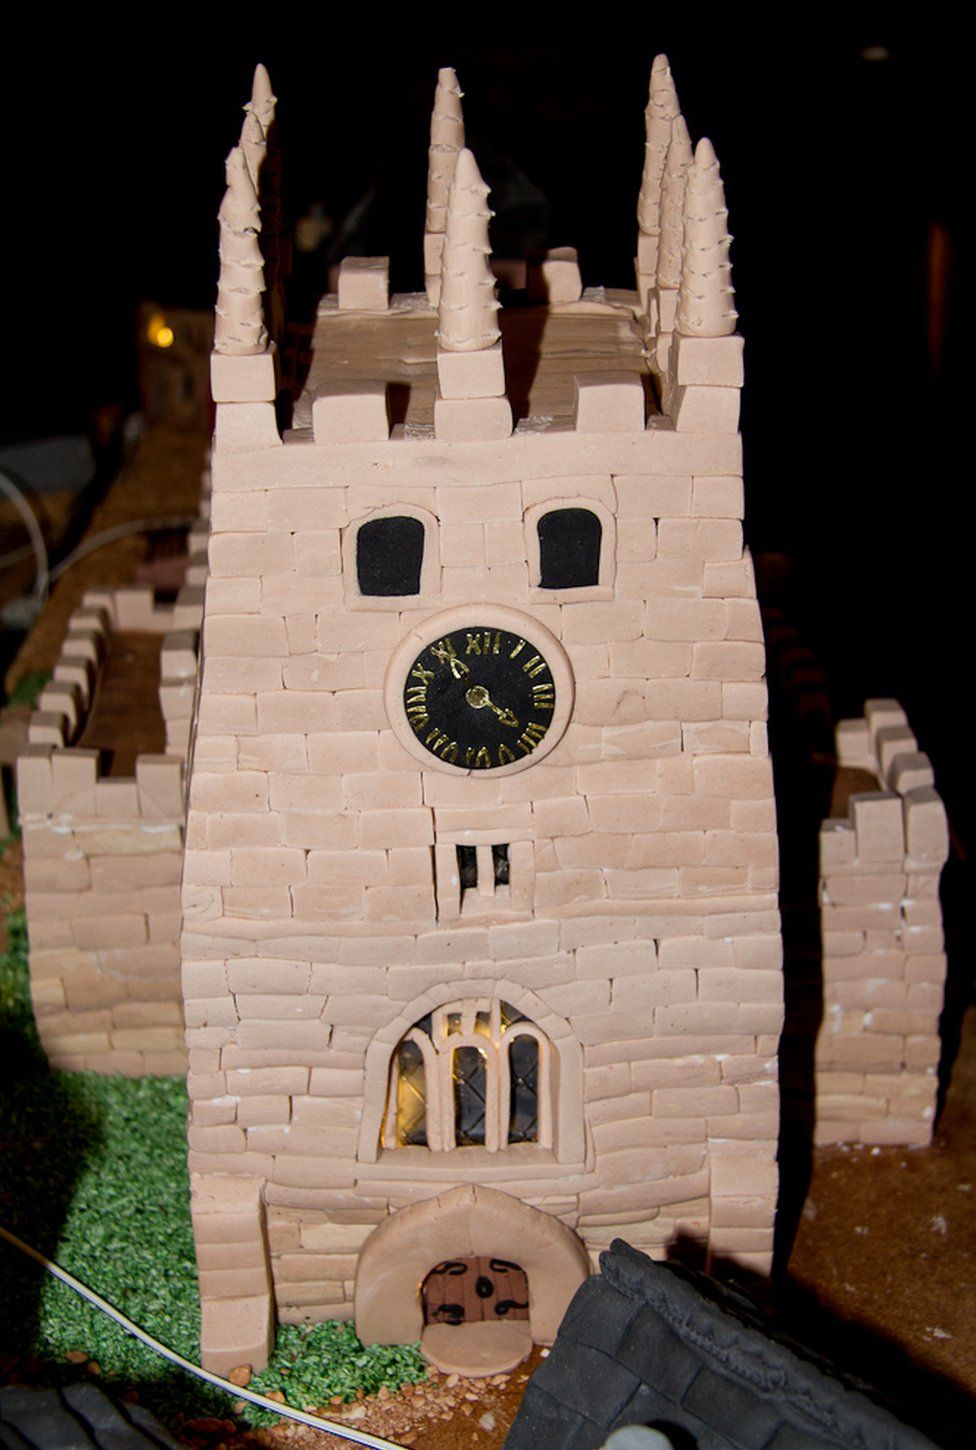 Church made from cake